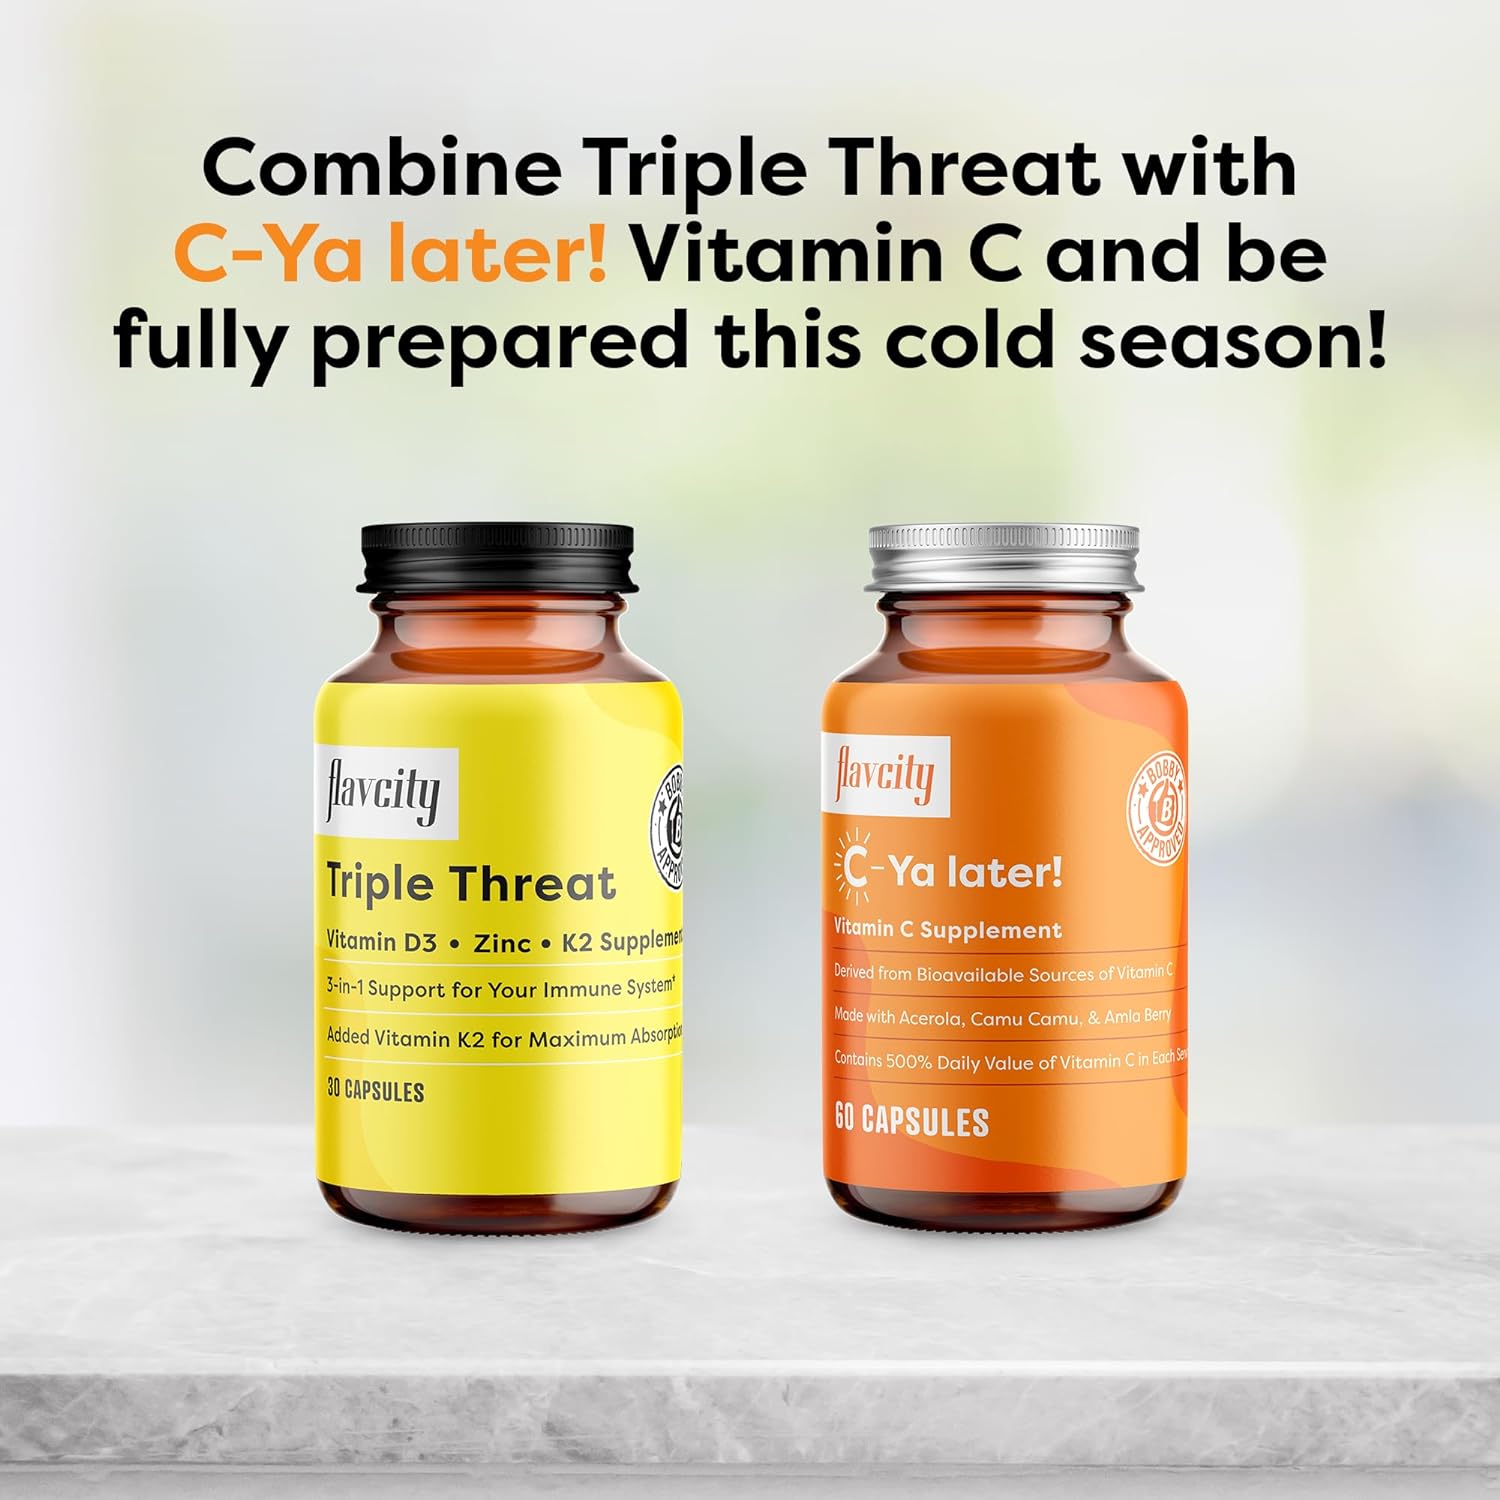 FlavCity Vitamin D Supplement, Triple Threat - 3-in-1 Dietary Supplement for Immune Support - Made with Vitamin D3, Zinc & Vitamin K2 for Maximum Absorption - 30 Capsules : Health & Household